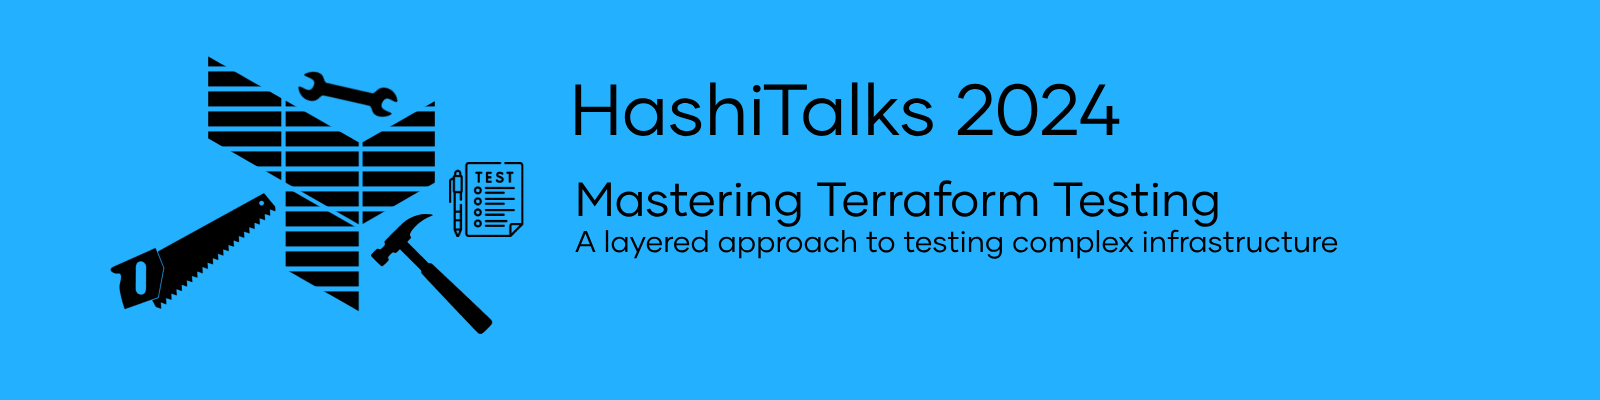 HashiTalks 2024: Mastering Terraform Testing, a layered approach to testing complex infrastructure